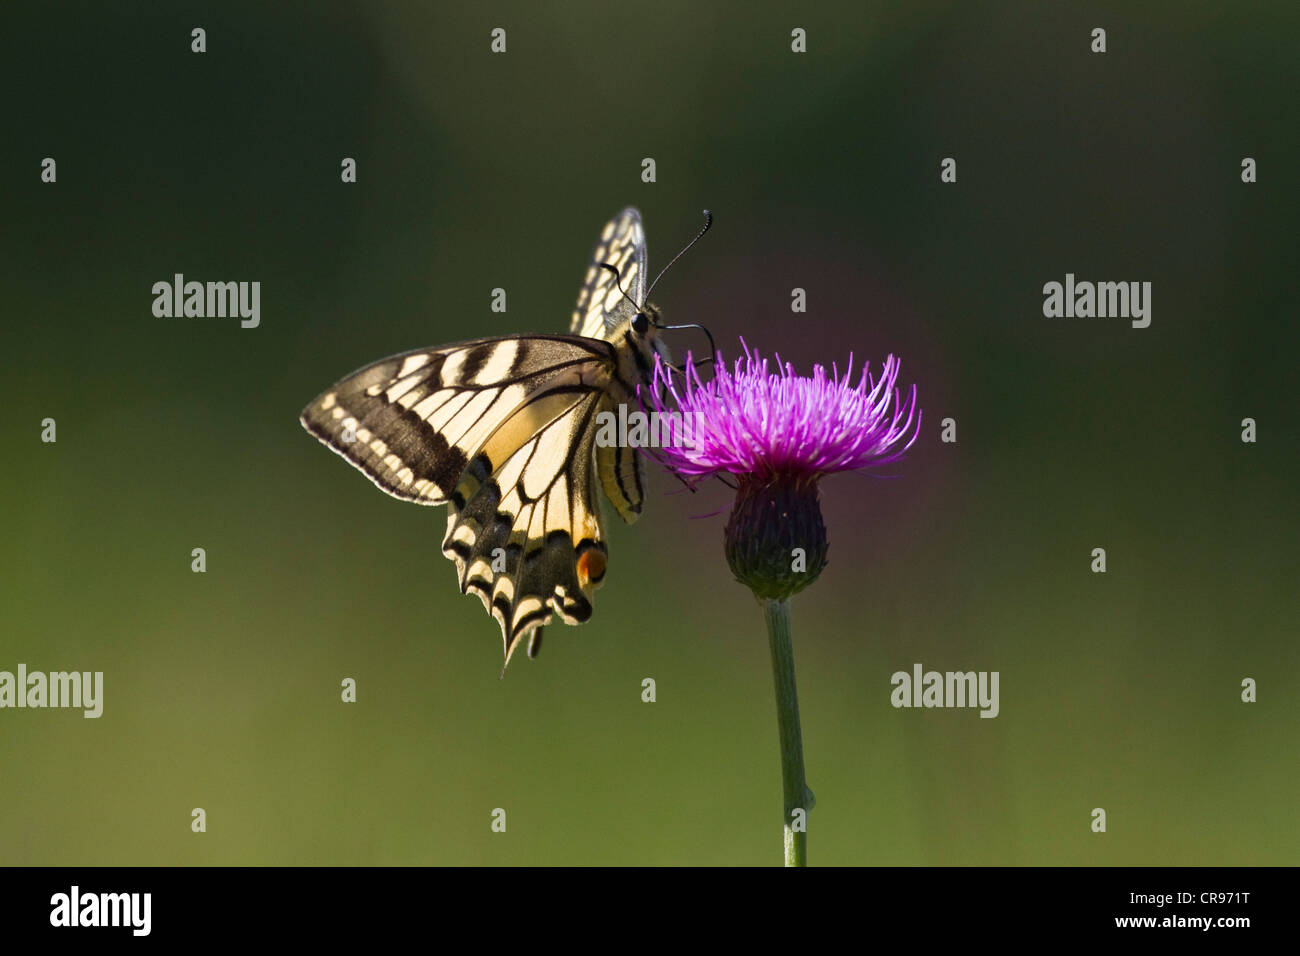 Common yellow swallowtail (Papilio machaon) perched on a blooming thistle, Upper Bavaria, Bavaria, Germany, Europe Stock Photo